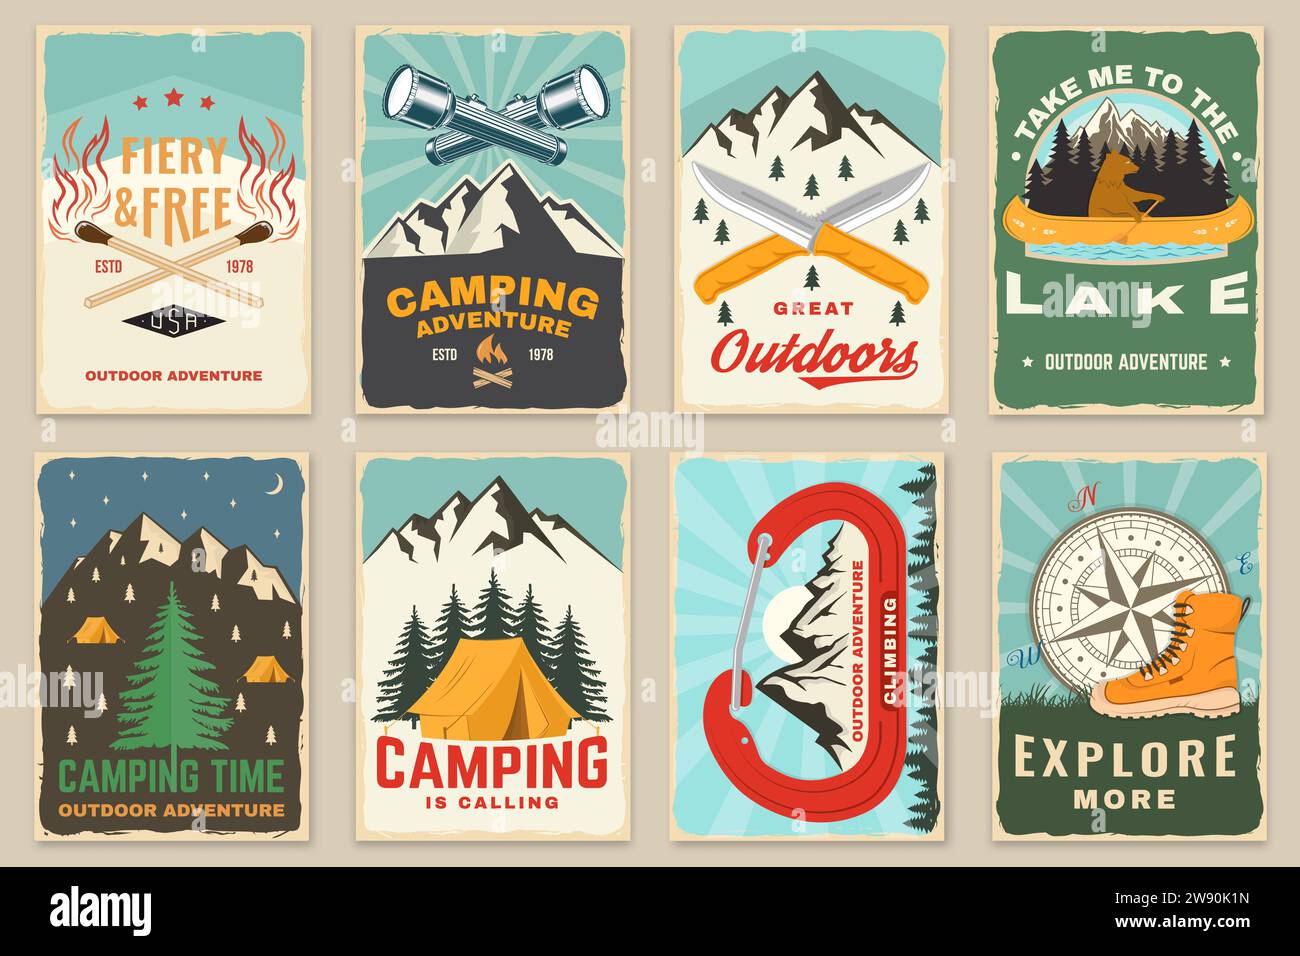 Set of camping retro posters. Outdoor adventure vector badge design. Vintage typography design with knives, camping flashlight, bear in canoe, matches Stock Vector